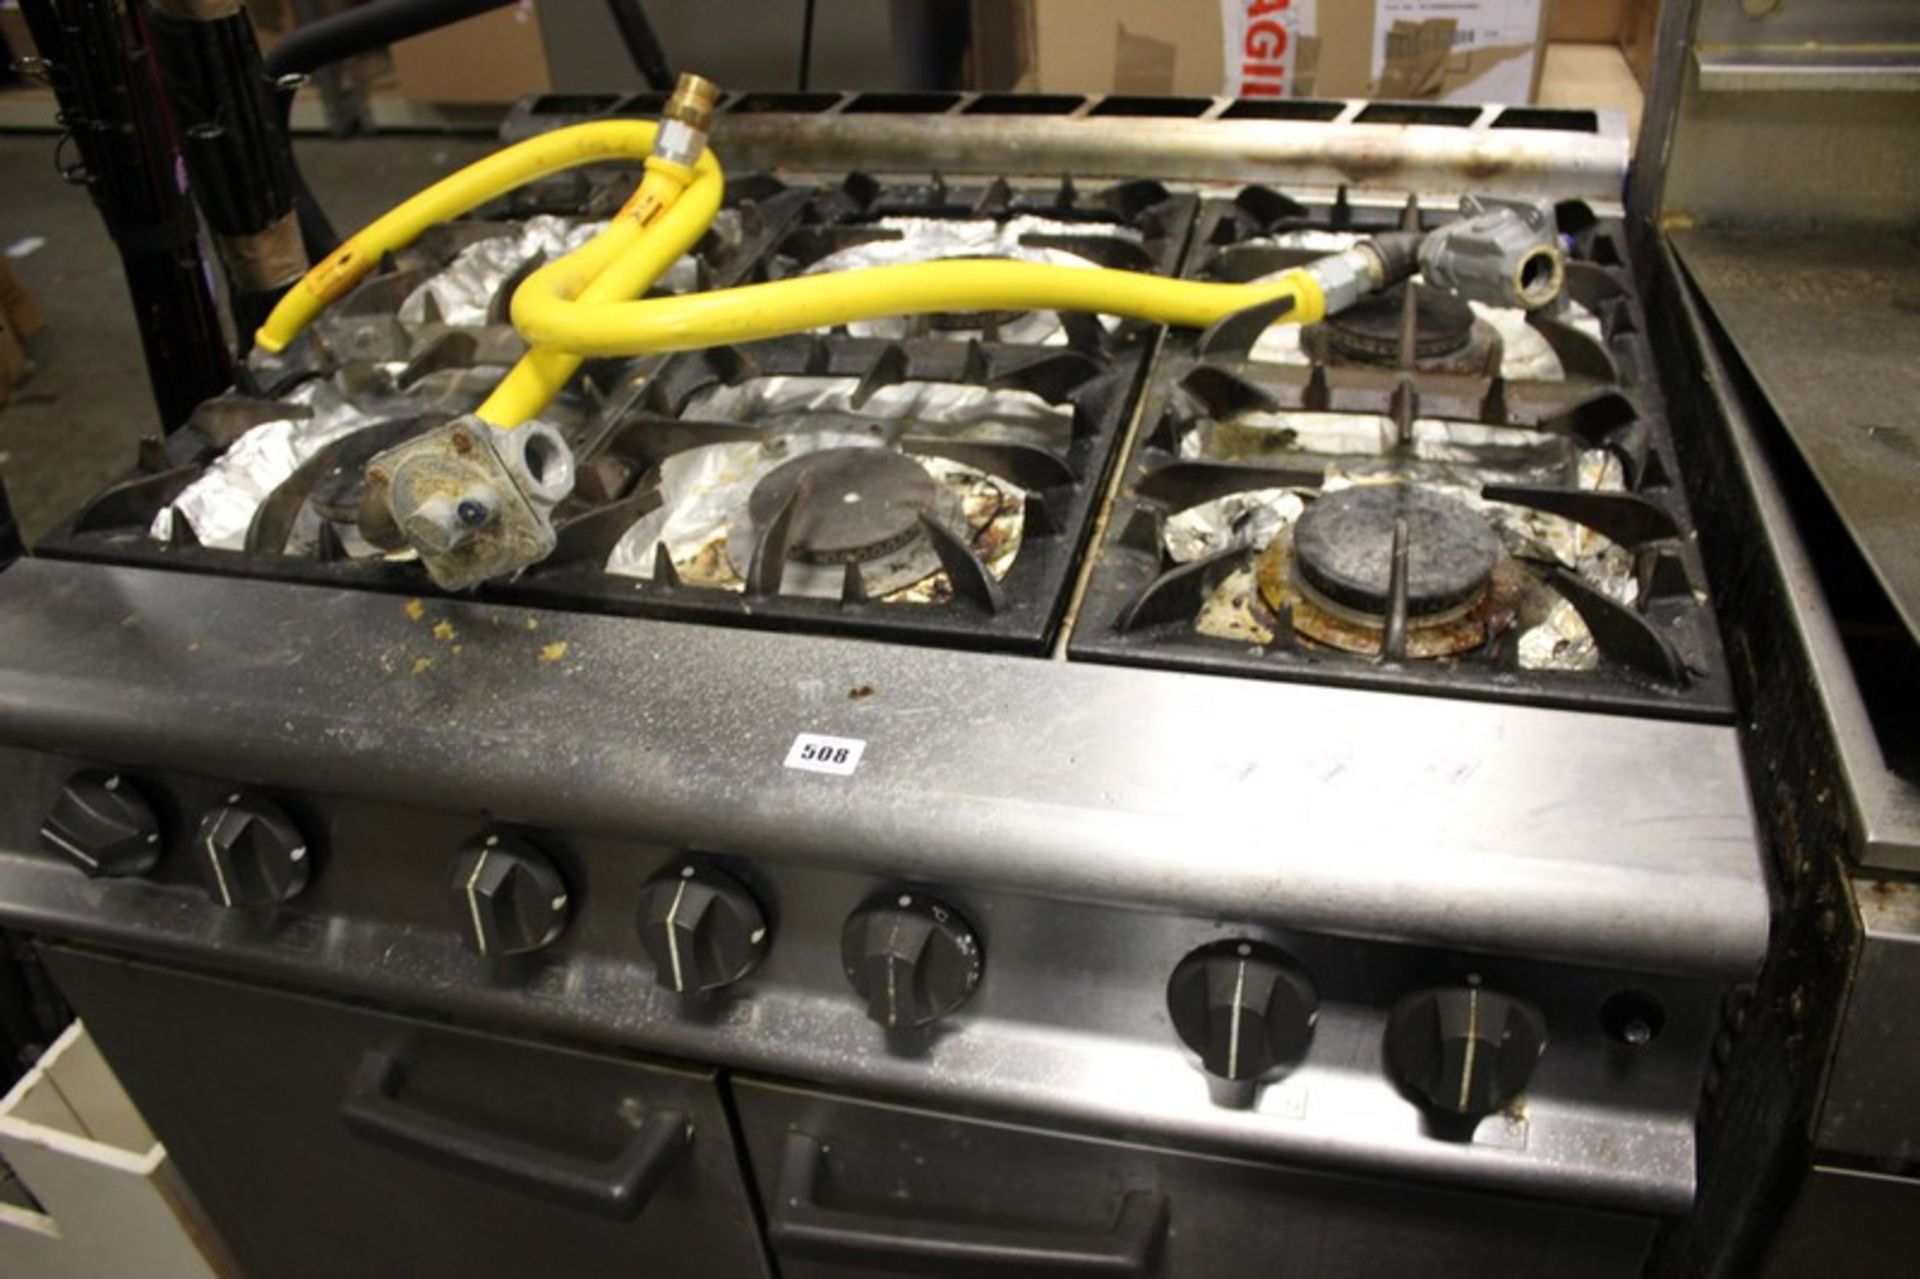 A Falcon six ring gas hob commercial gas oven model G3101D.